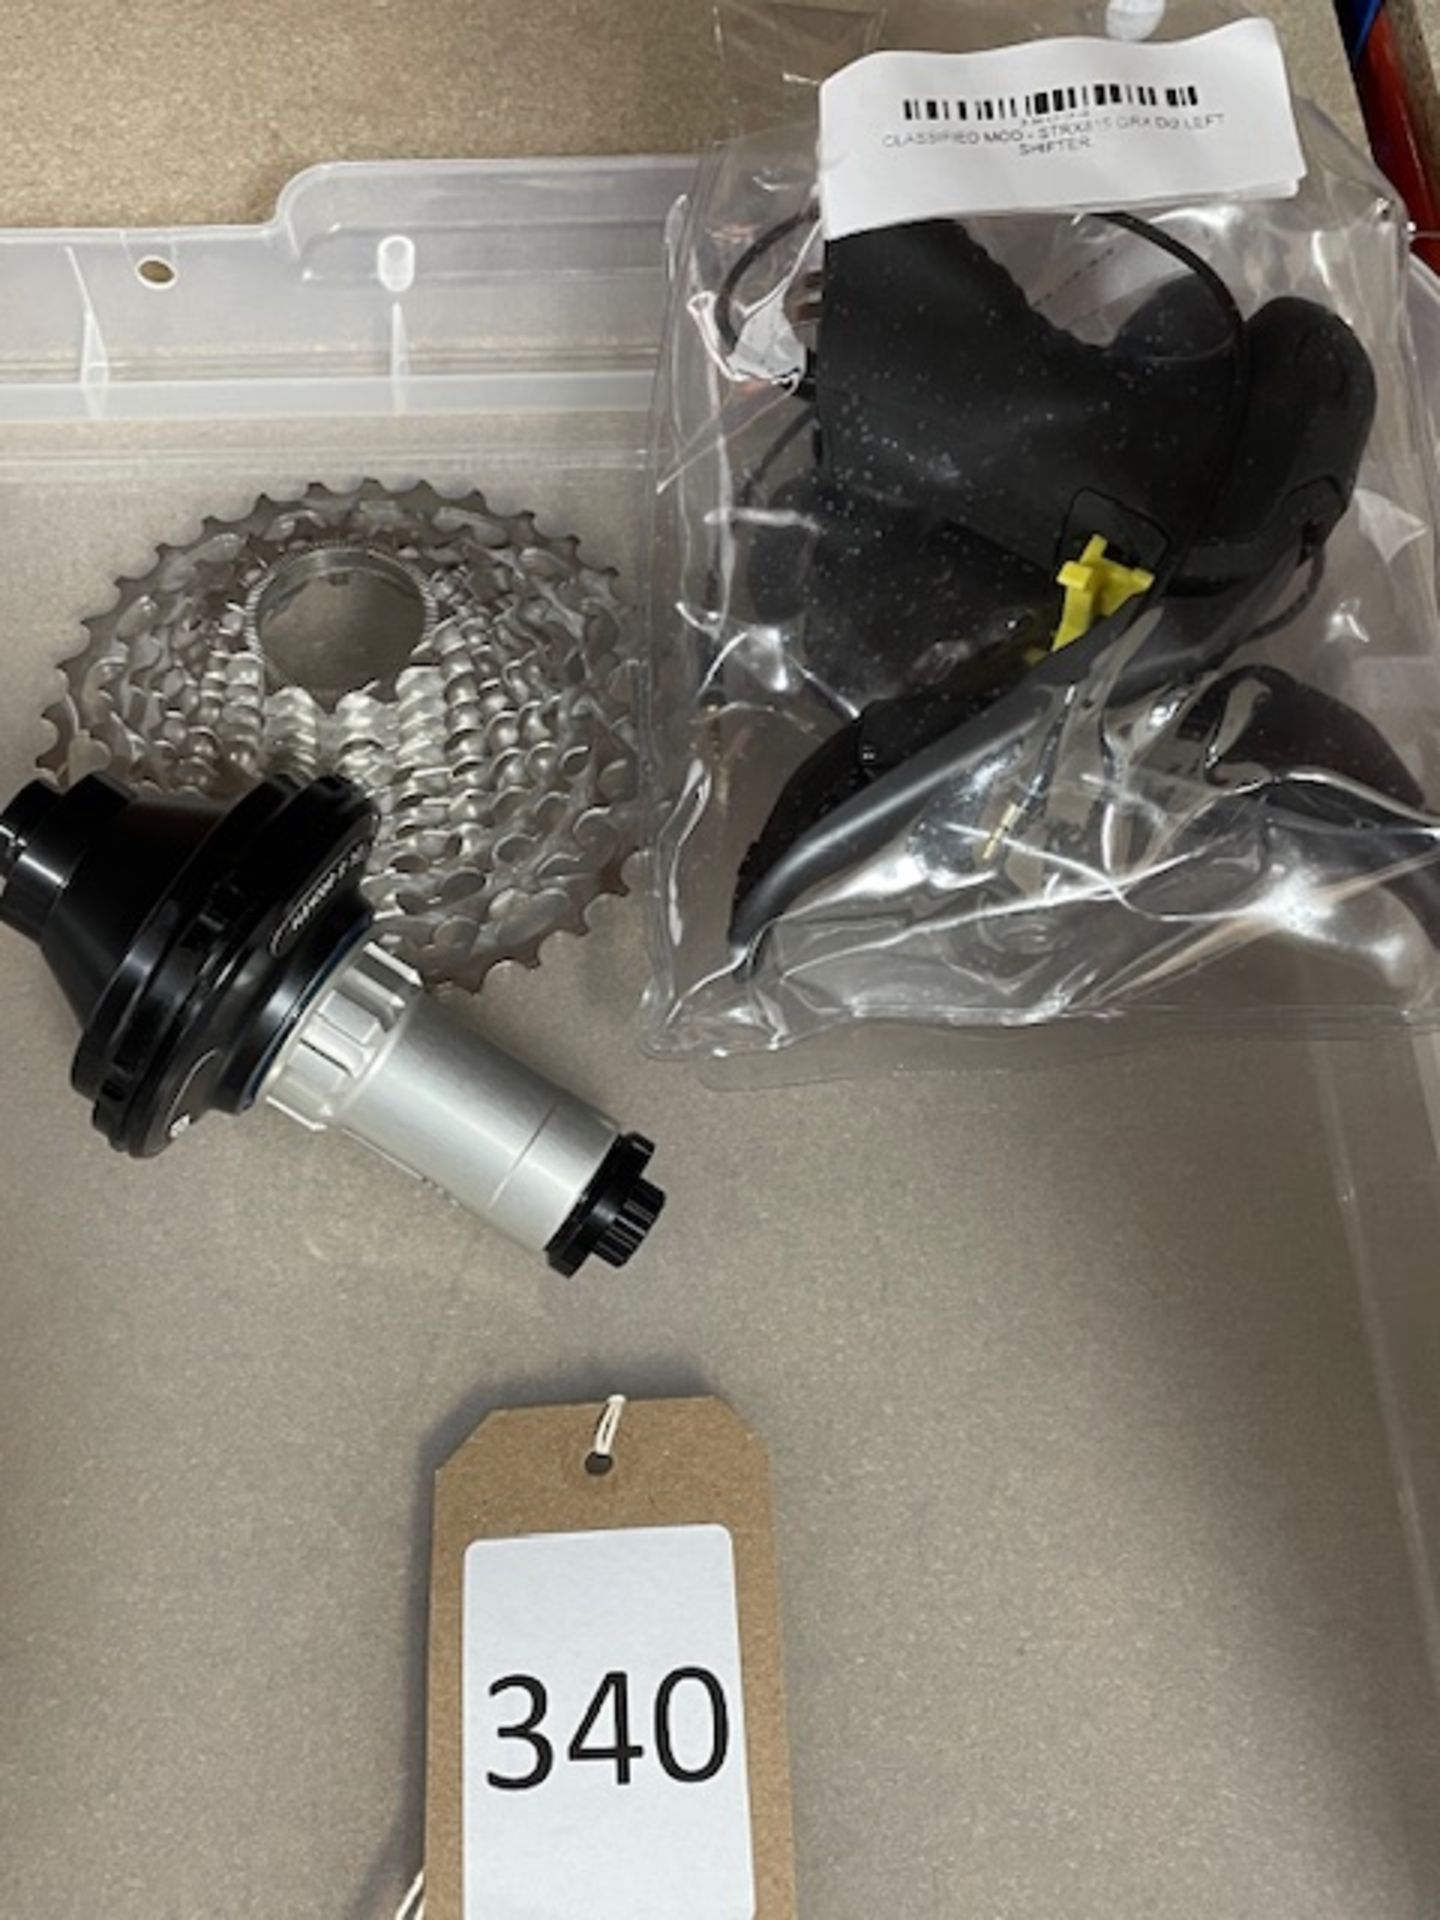 Classified Components, Cassette, Hub, Hub Gear & Two Di2 Shifters (Location: Newport Pagnell. Please